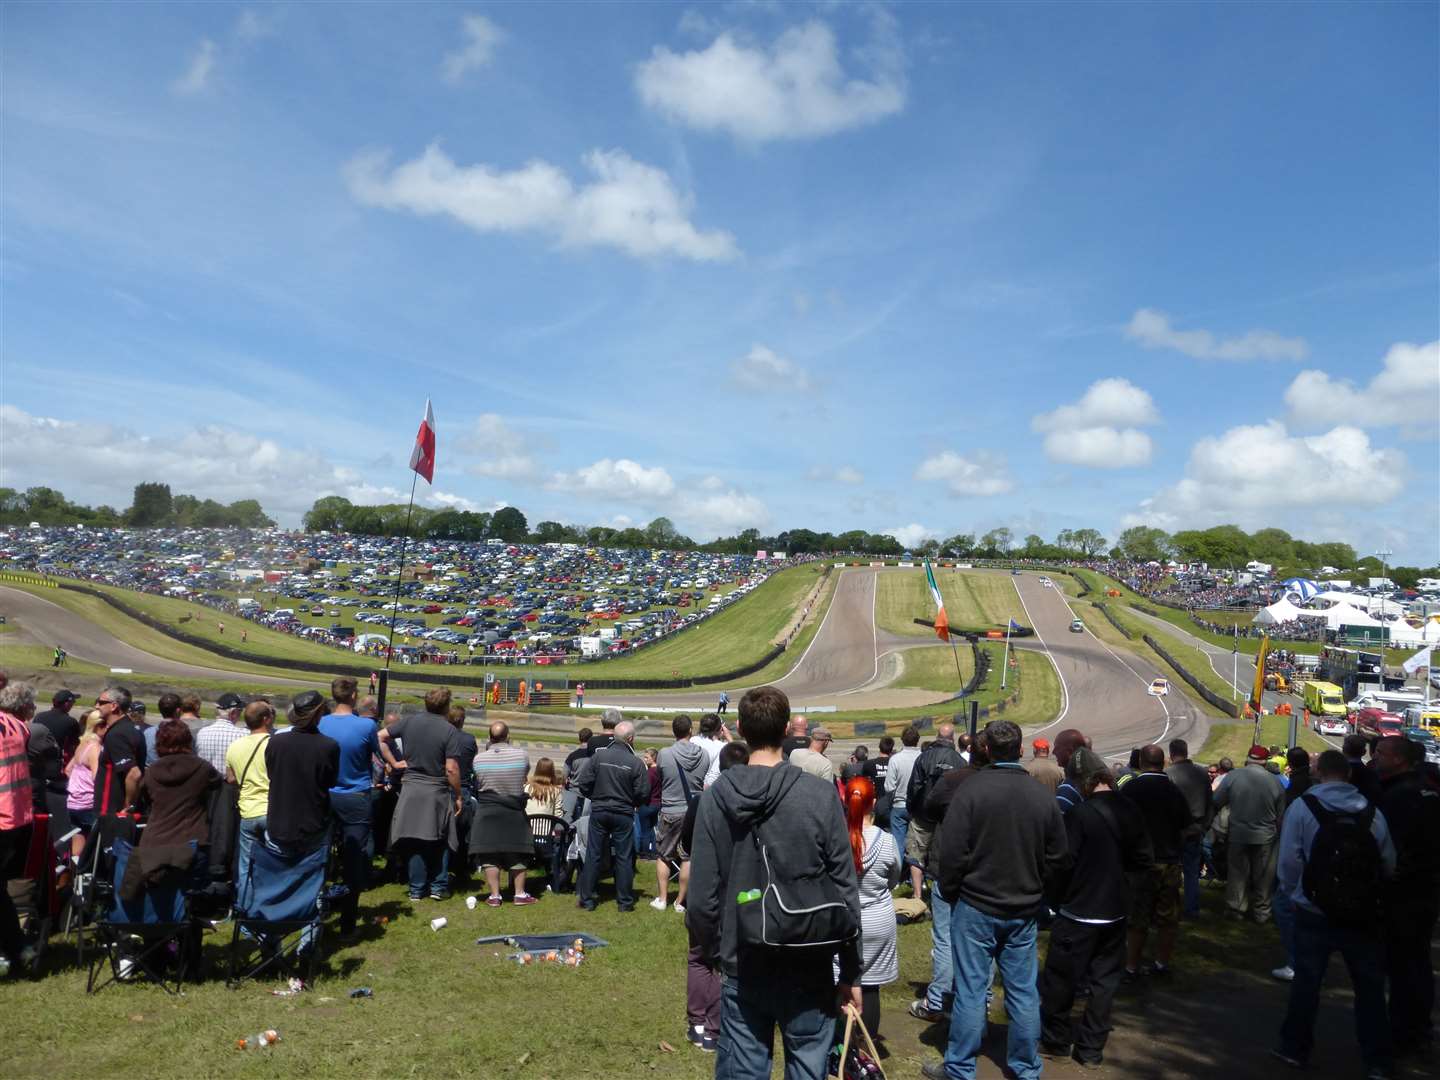 10,000 spectators at the World Rallycross event at Lydden Hill in 2014. Picture: Joe Wright